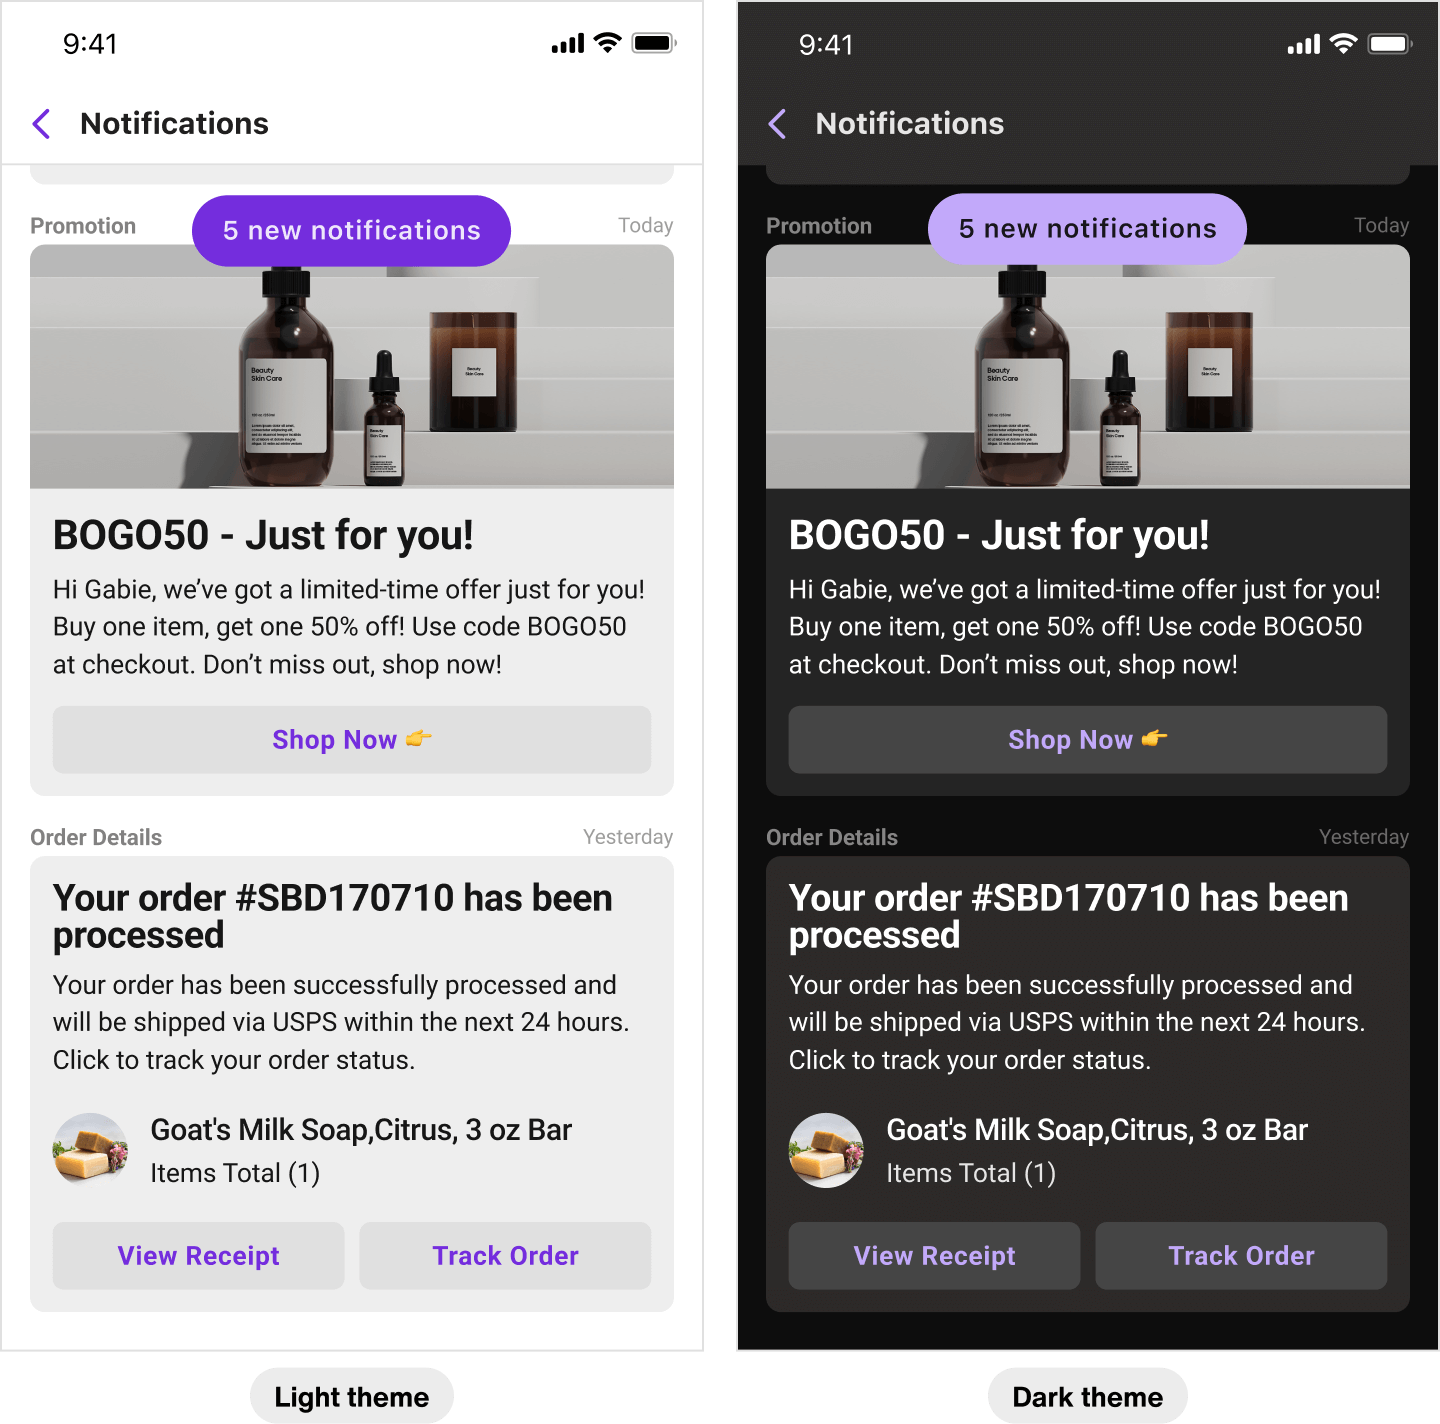 Image|An image showing iOS' light-theme view on the left and dark-theme on the right.